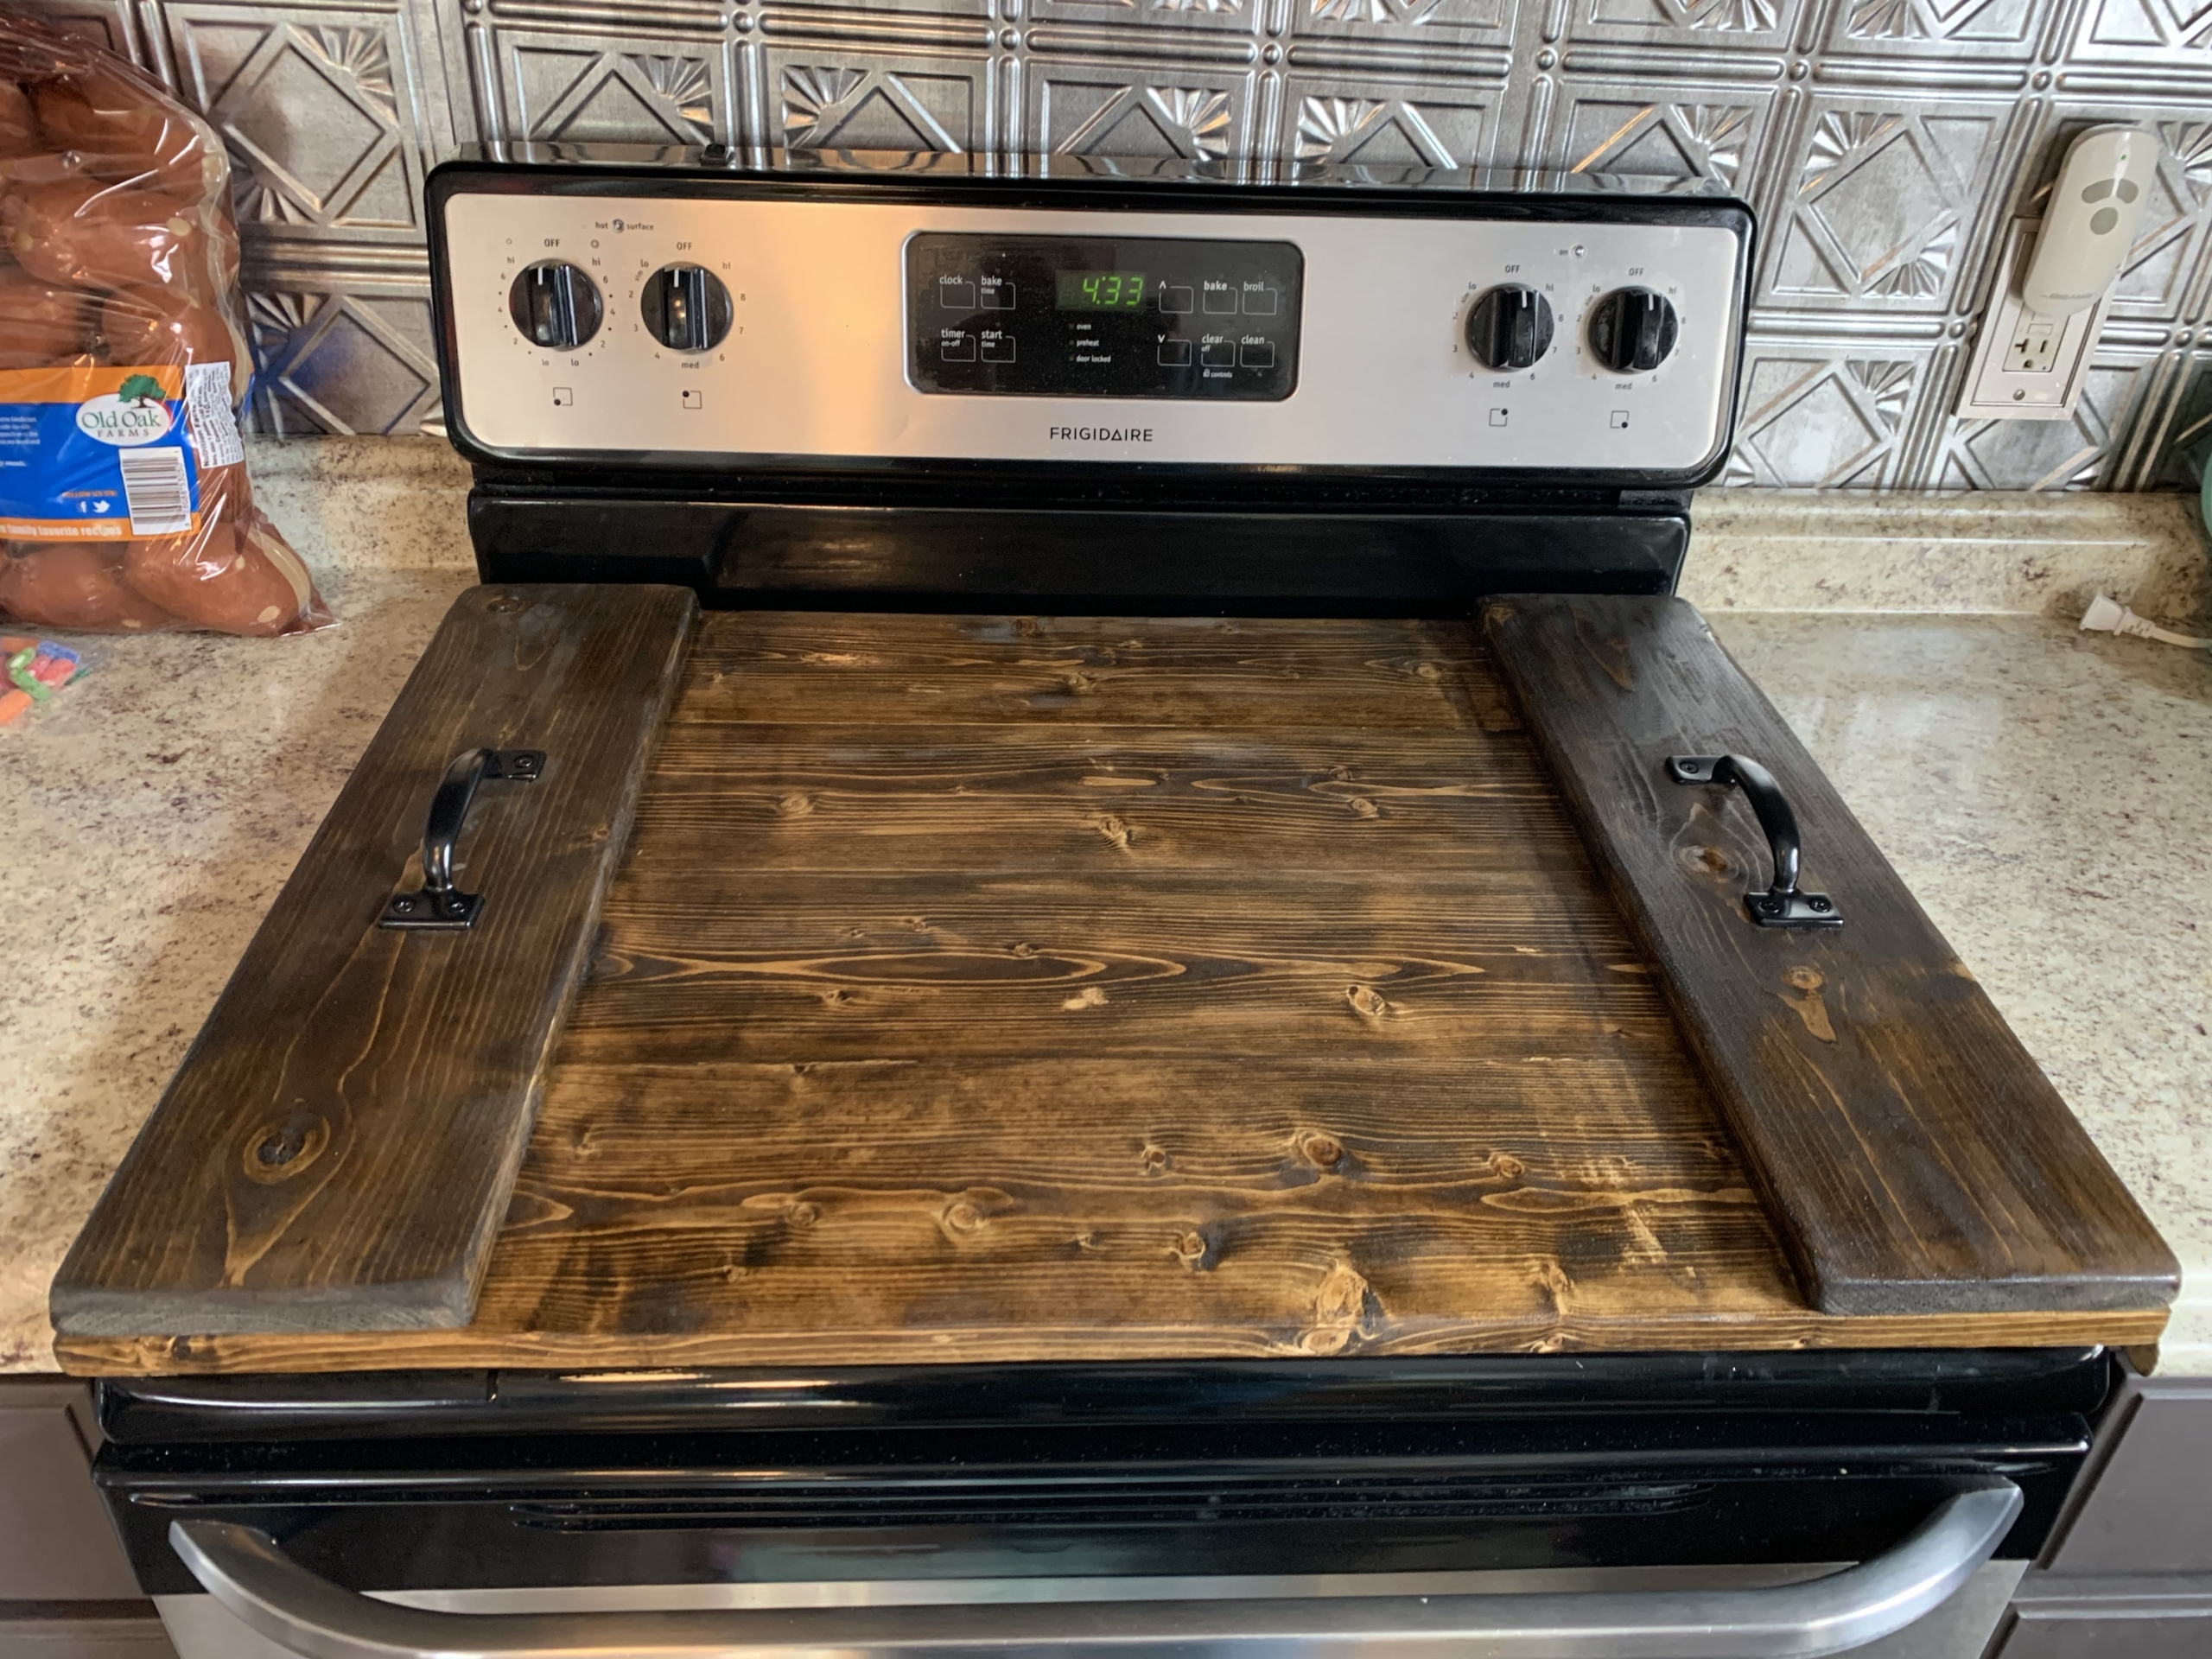 Wood Stove Topper - Cover Your Gas StoveIntroducing our beautifully crafted  wooden stove topper, designed to add a touch of rustic charm to your kitchen  while protecting your stove from scratches, stains